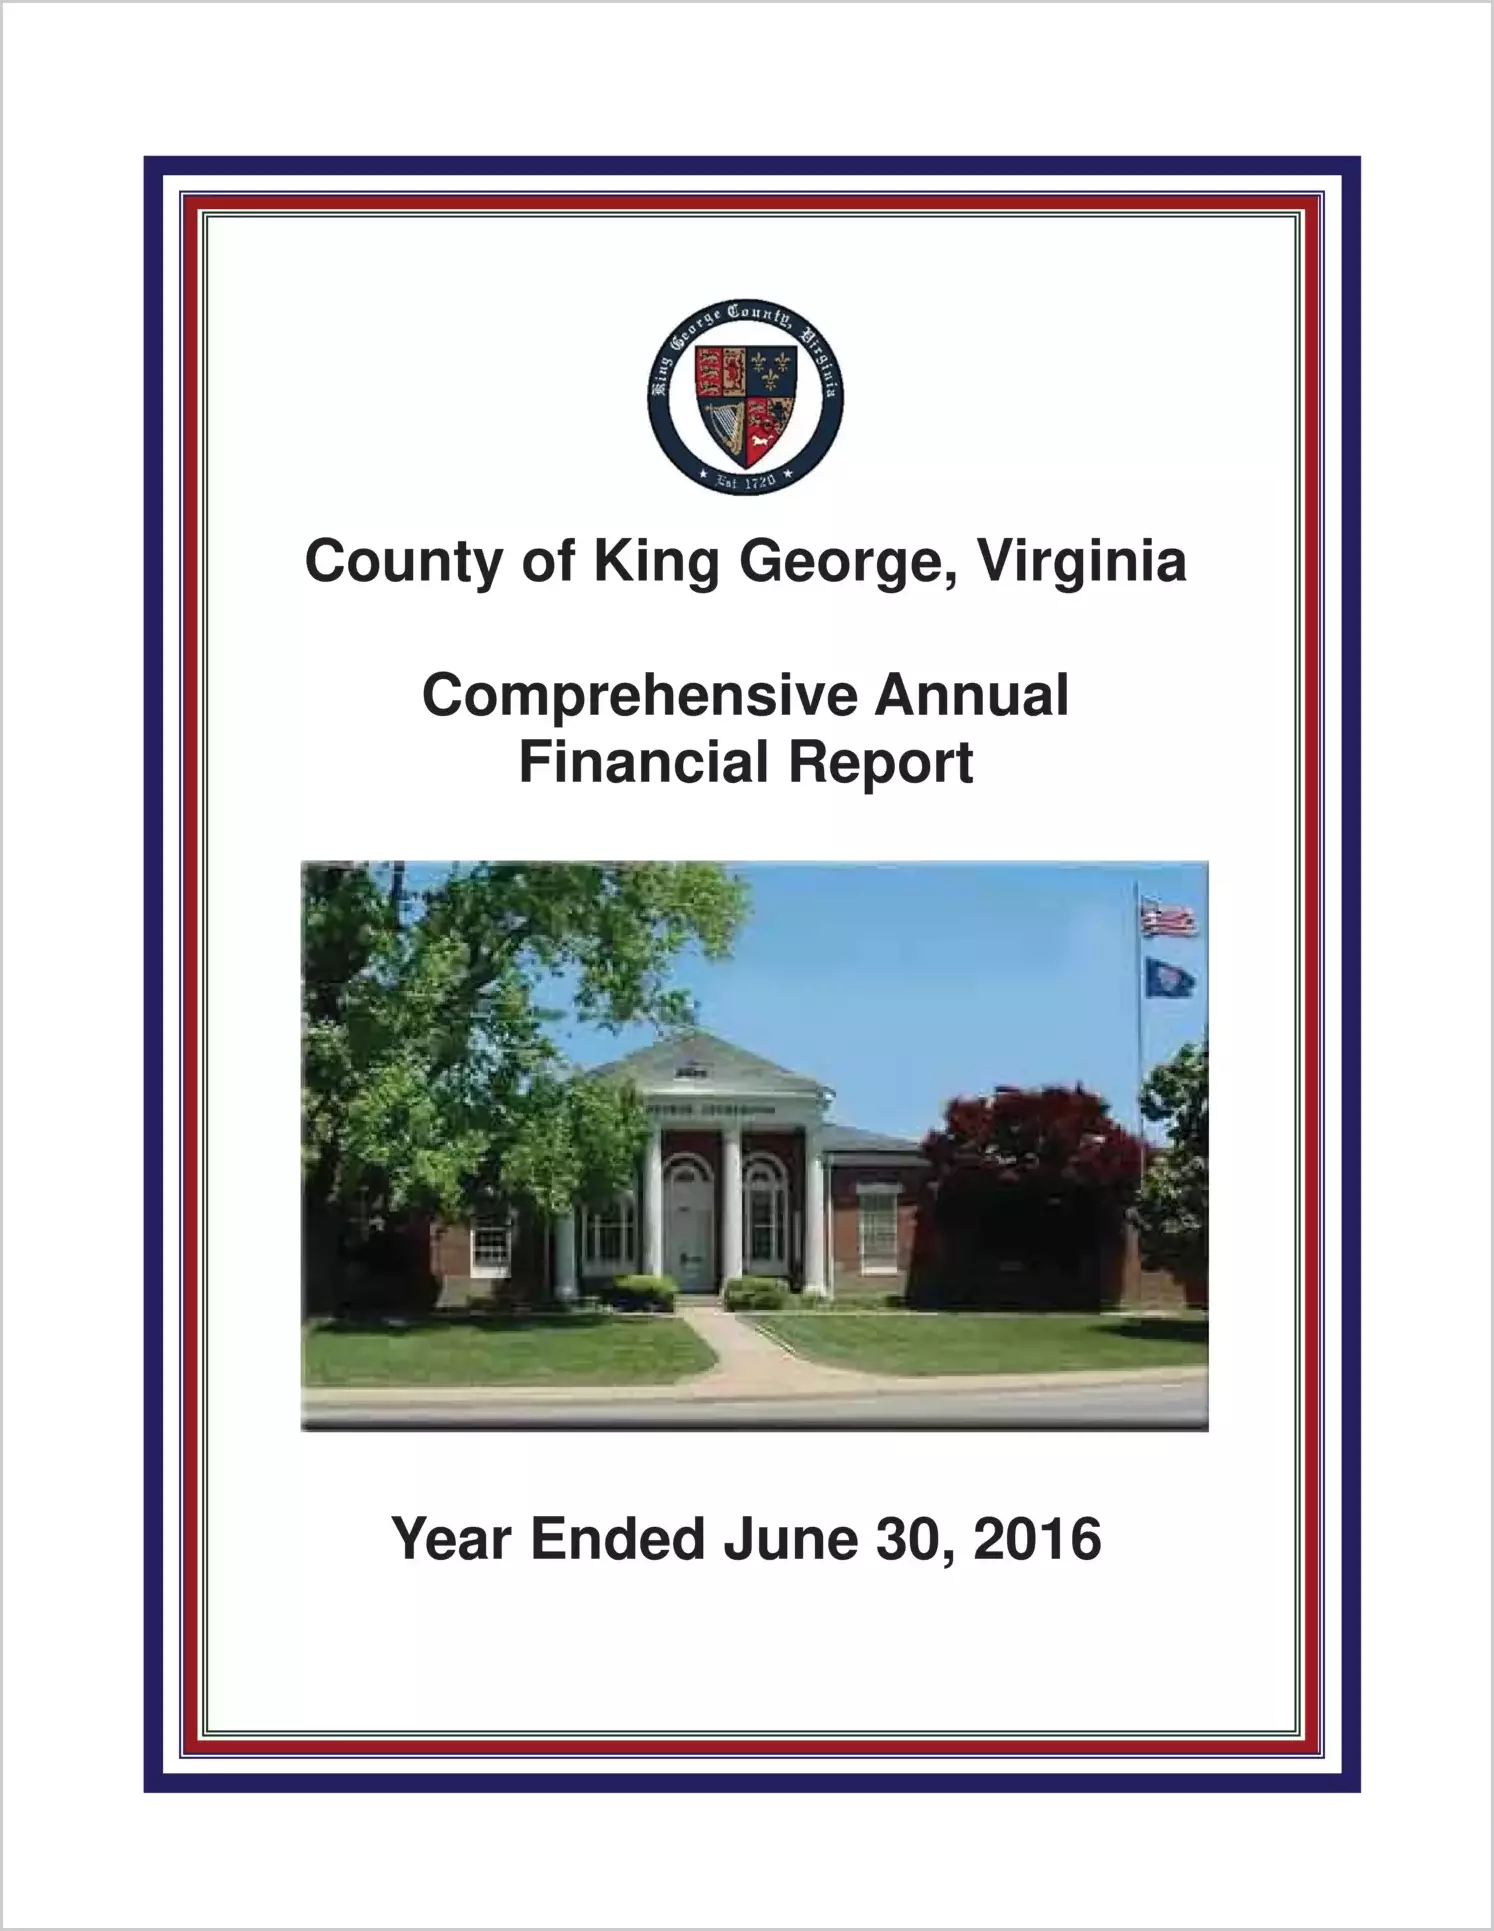 2016 Annual Financial Report for County of King George